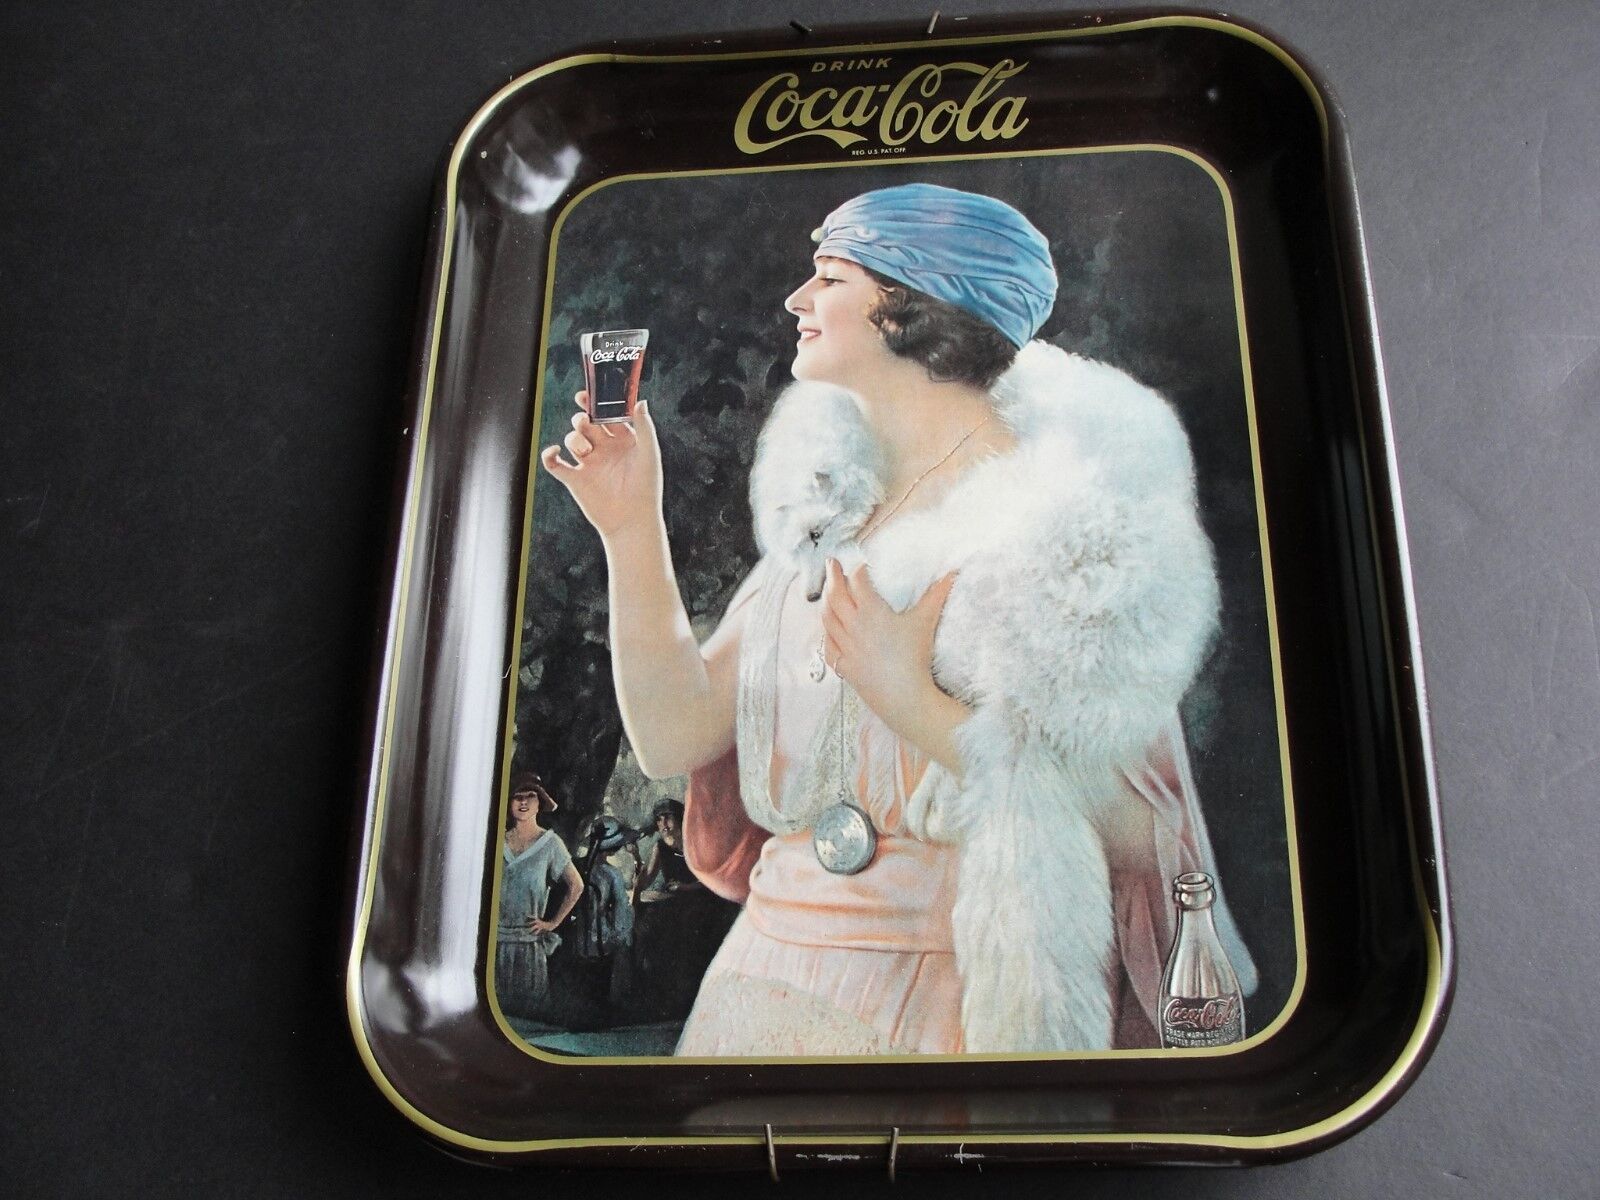 Primary image for Drink Coca-Cola, Flapper Girl-Tray 1973 Reproduction from 1925 Advertisement. 